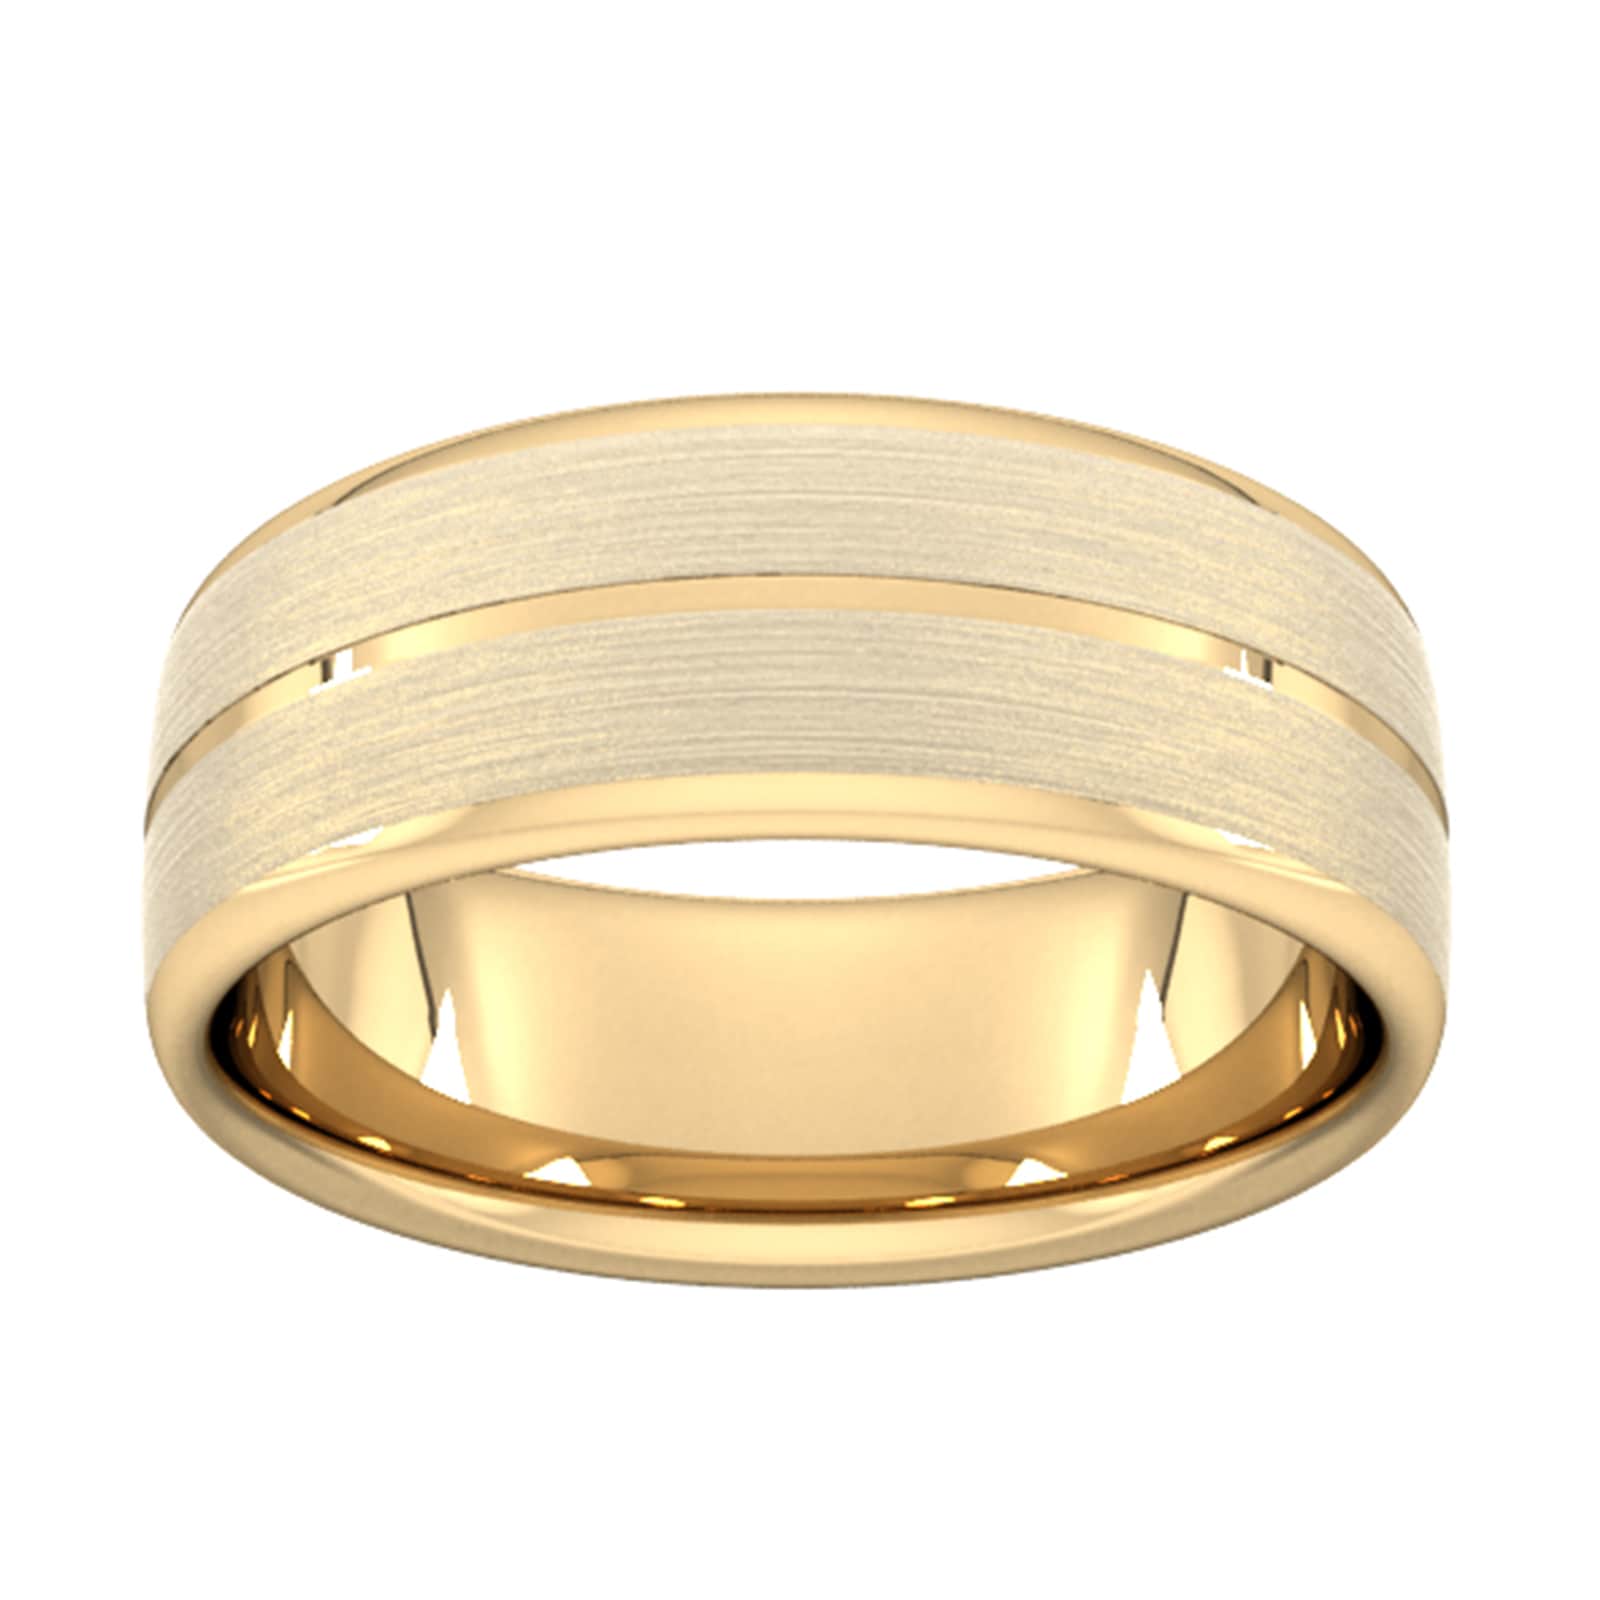 8mm D Shape Heavy Centre Groove With Chamfered Edge Wedding Ring In 18 Carat Yellow Gold - Ring Size O